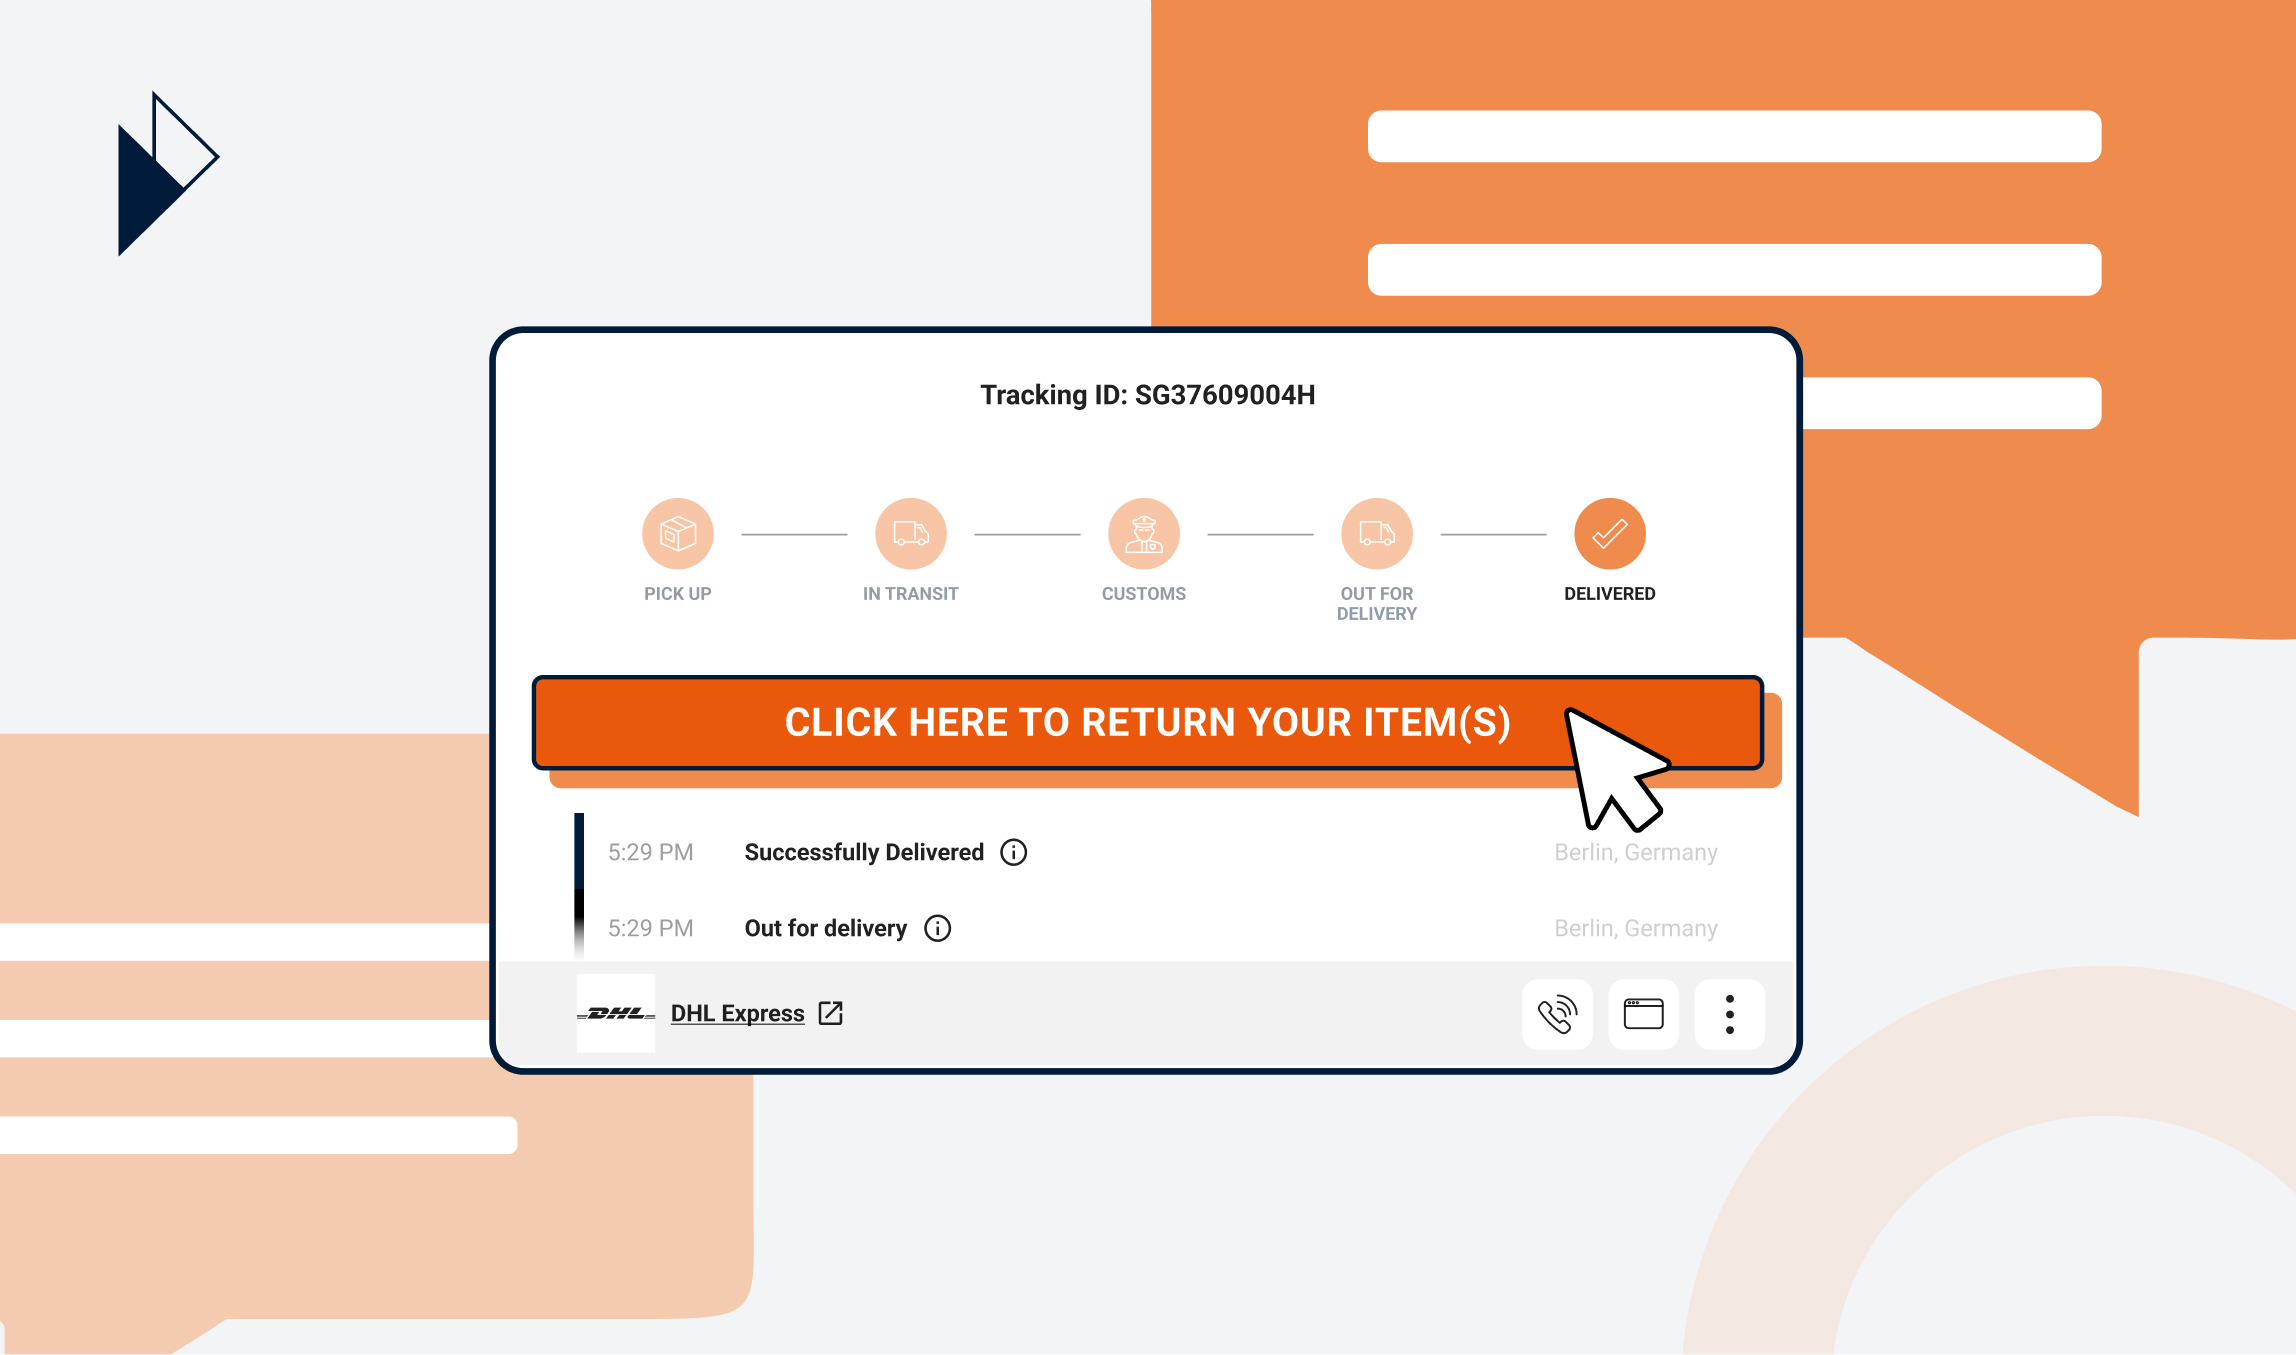 Parcel Perform's digital returns solution enables e-commerce businesses to streamline, automate, and manage returns. It makes the returns process simple and easy for internal logistics and customer service teams, and customers. The abstract image shows a screenshot of the transition of our premium tracking page from delivery tracking to returns tracking. 